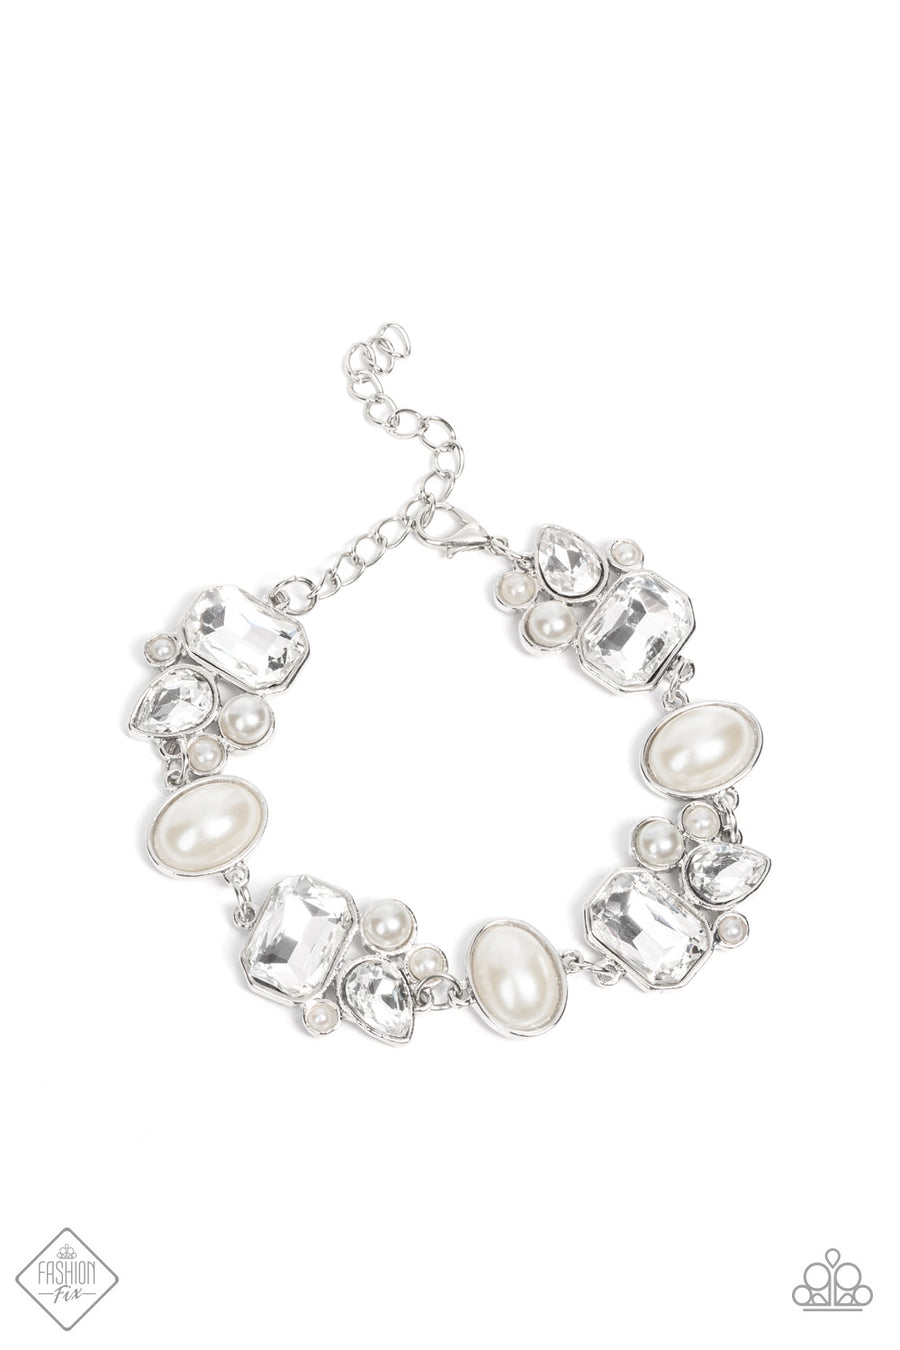 Best in SHOWSTOPPING - White Pearl Bracelets showstopping teardrop and emerald cut rhinestones, accented with bubbly pearl beads, coalesce into stunning asymmetrical frames. A trio of elegant white oval pearl beads delicately alternate with the asymmetrical renditions for a glamorous finish around the wrist. Features an adjustable clasp closure. Sold as one individual bracelet.